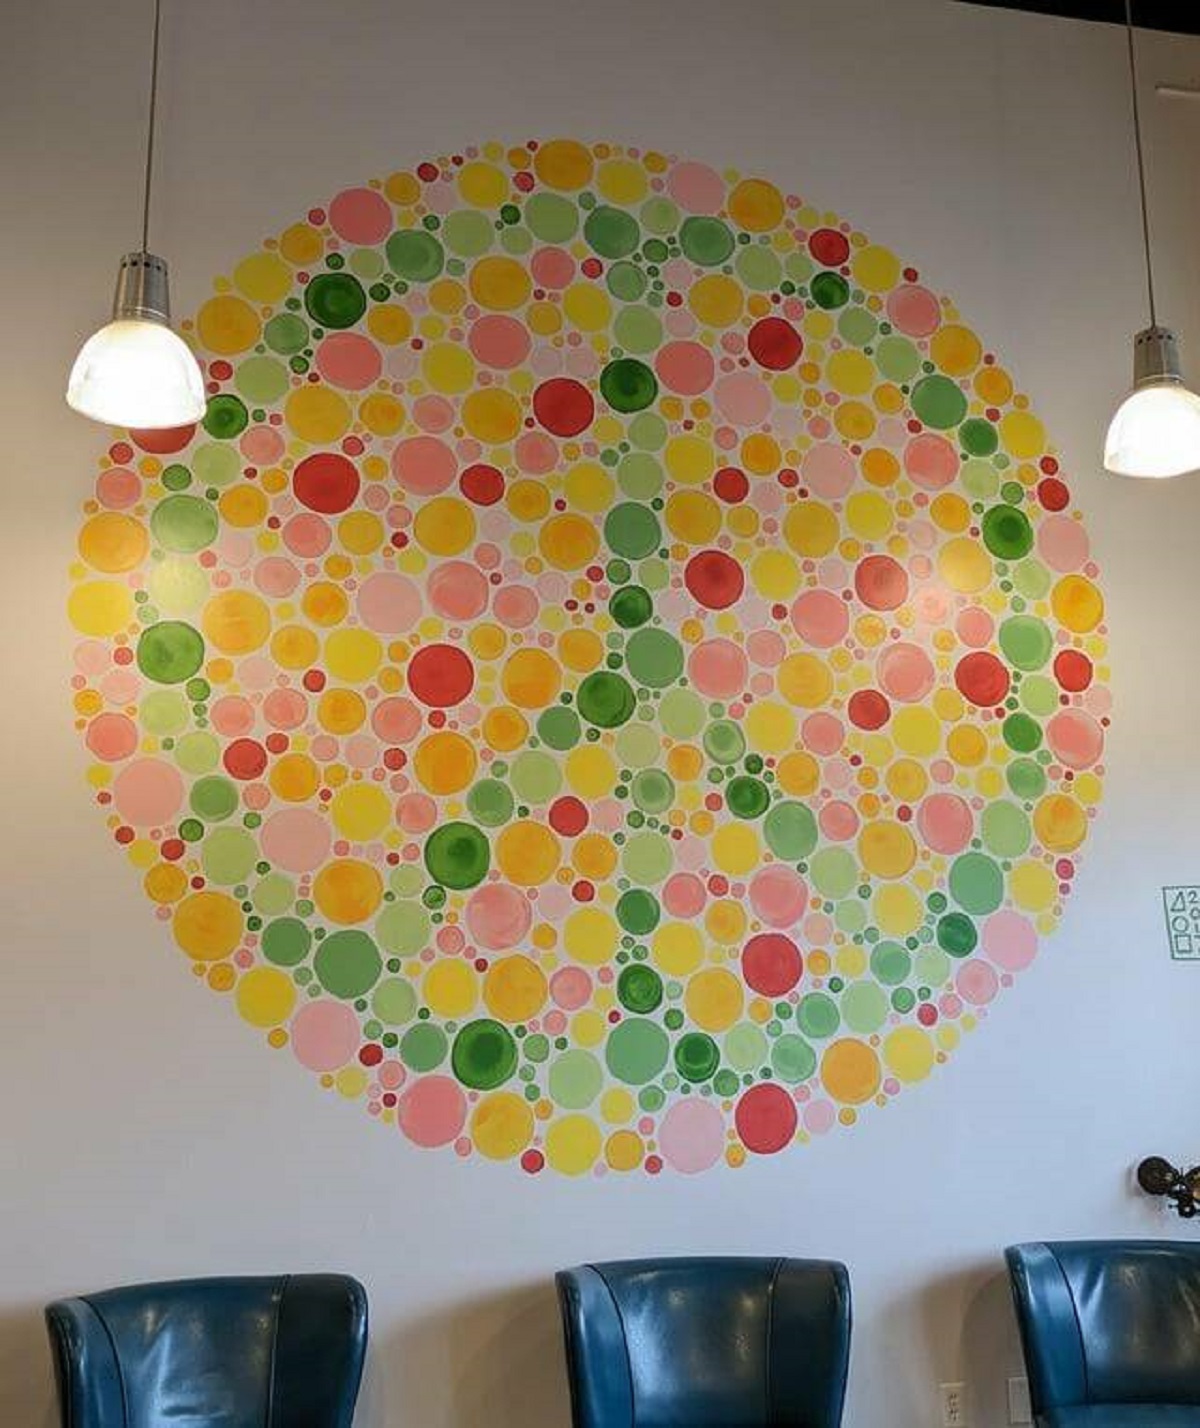 "This wall art at an optometrist's office"